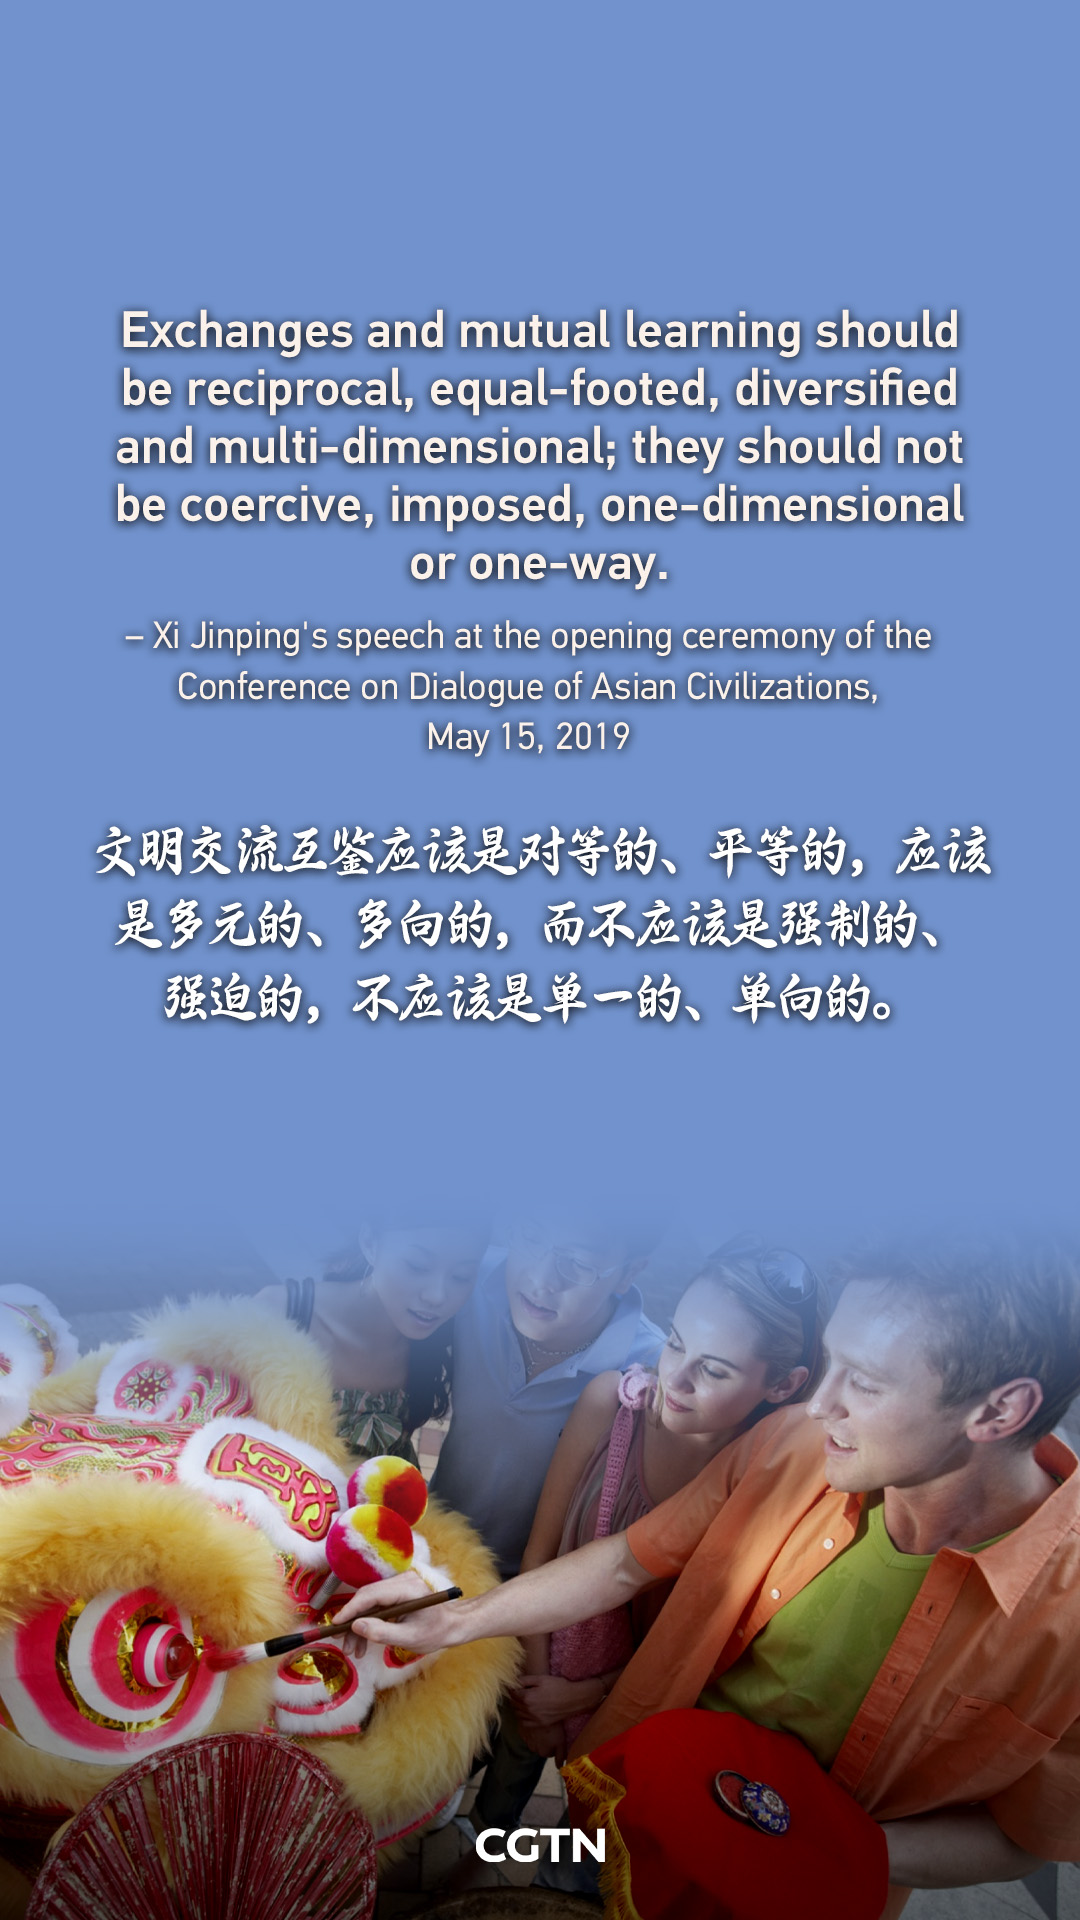 Xi Jinping's key quotes on exchanges and mutual learning among civilizations